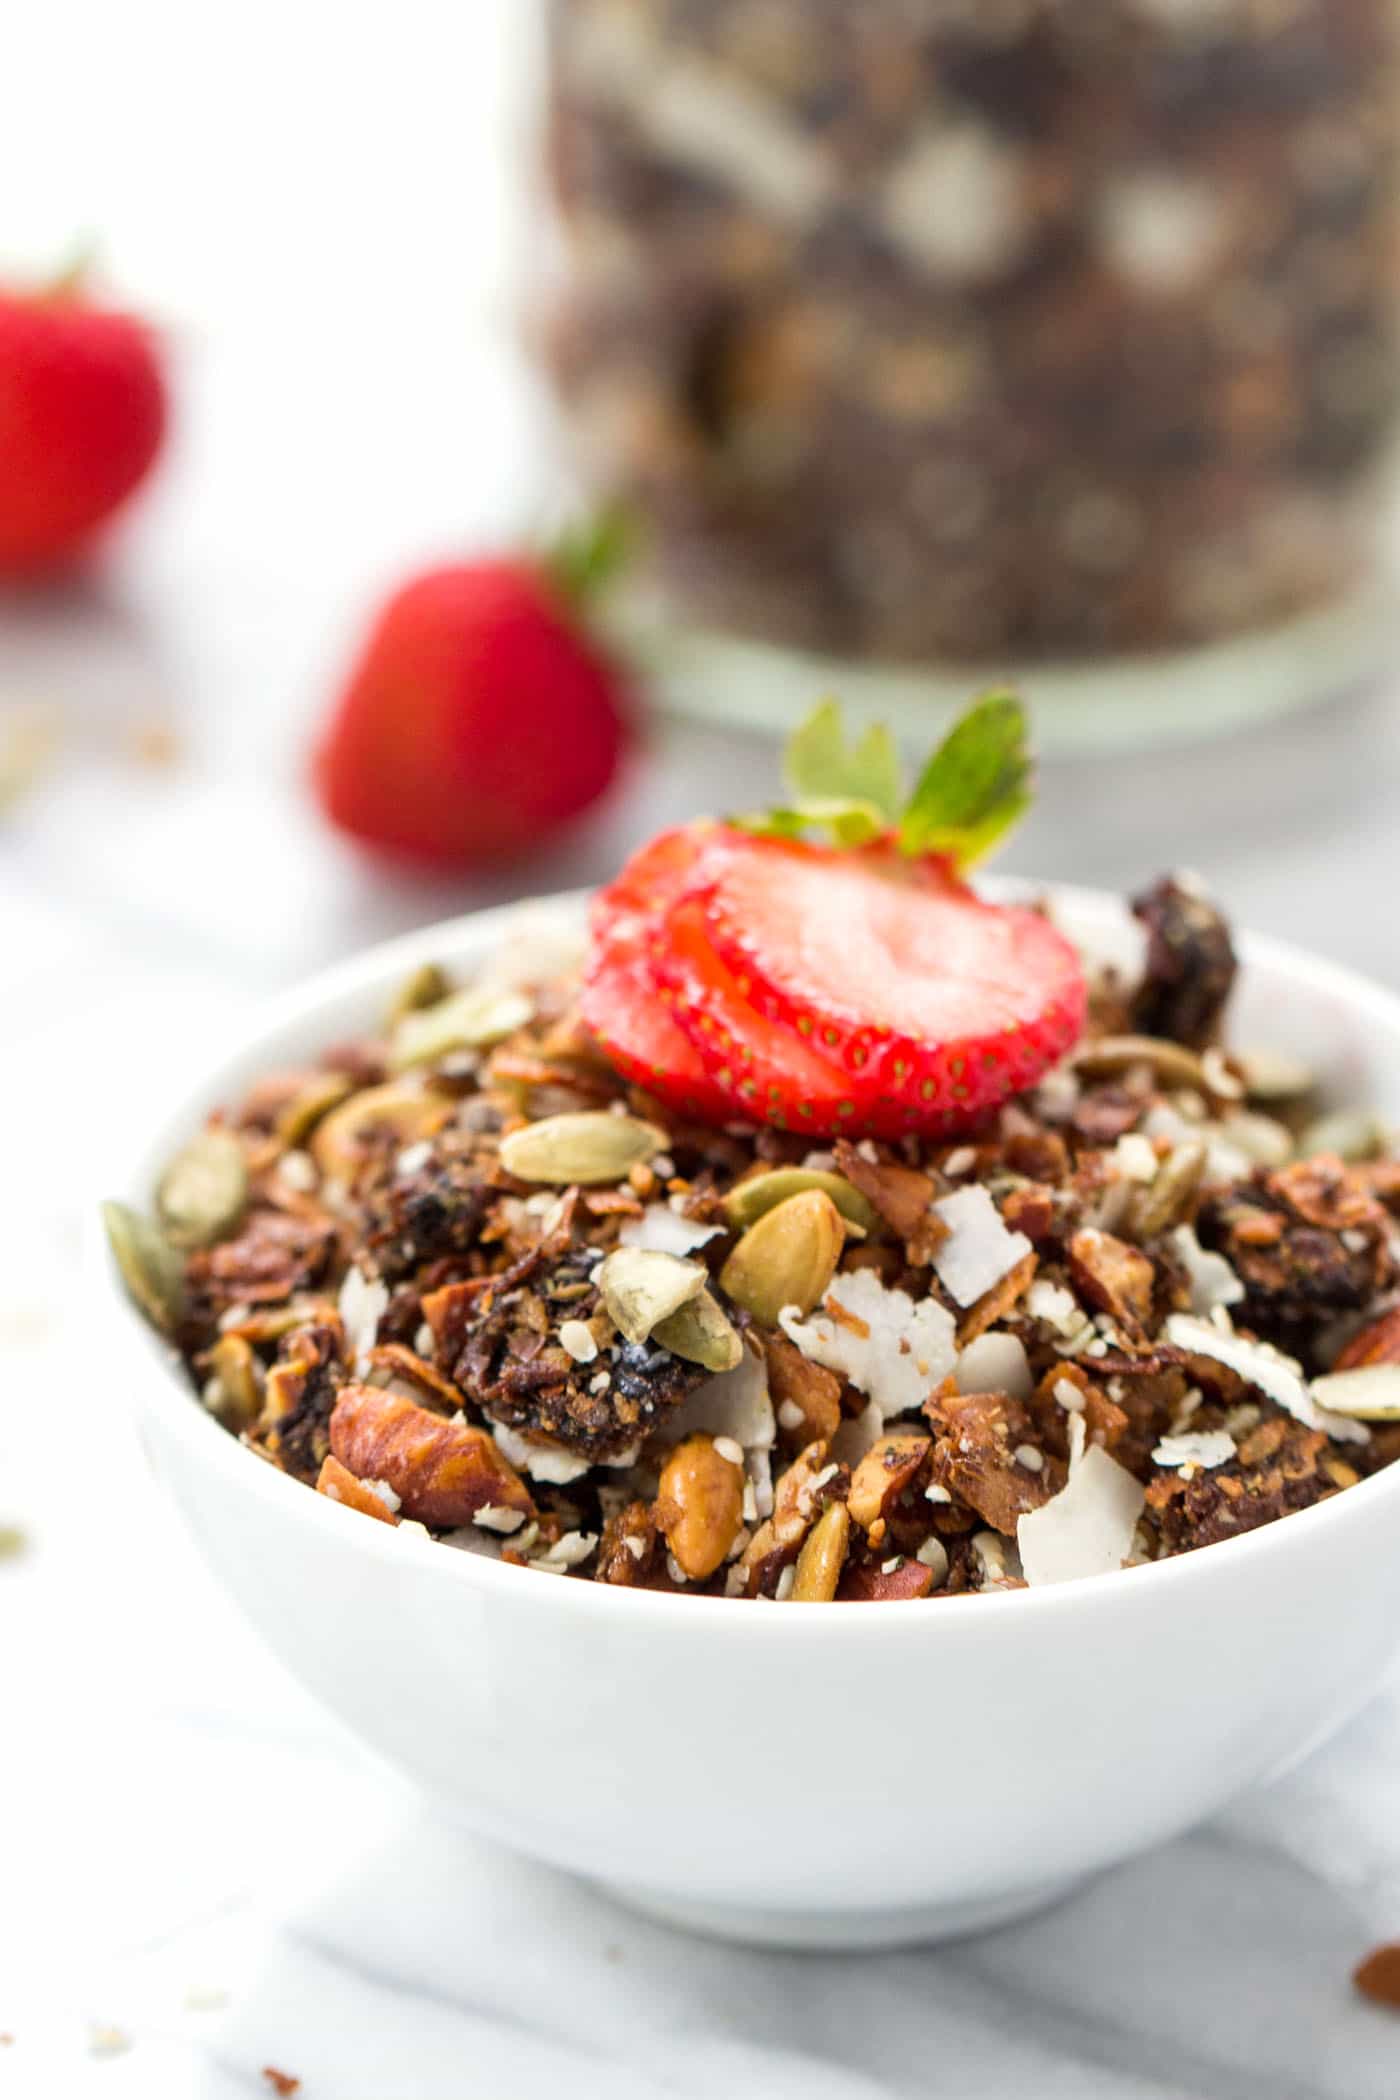 This simple grain-free coconut granola is made with healthy ingredients, sweetened naturally and tastes amazing!